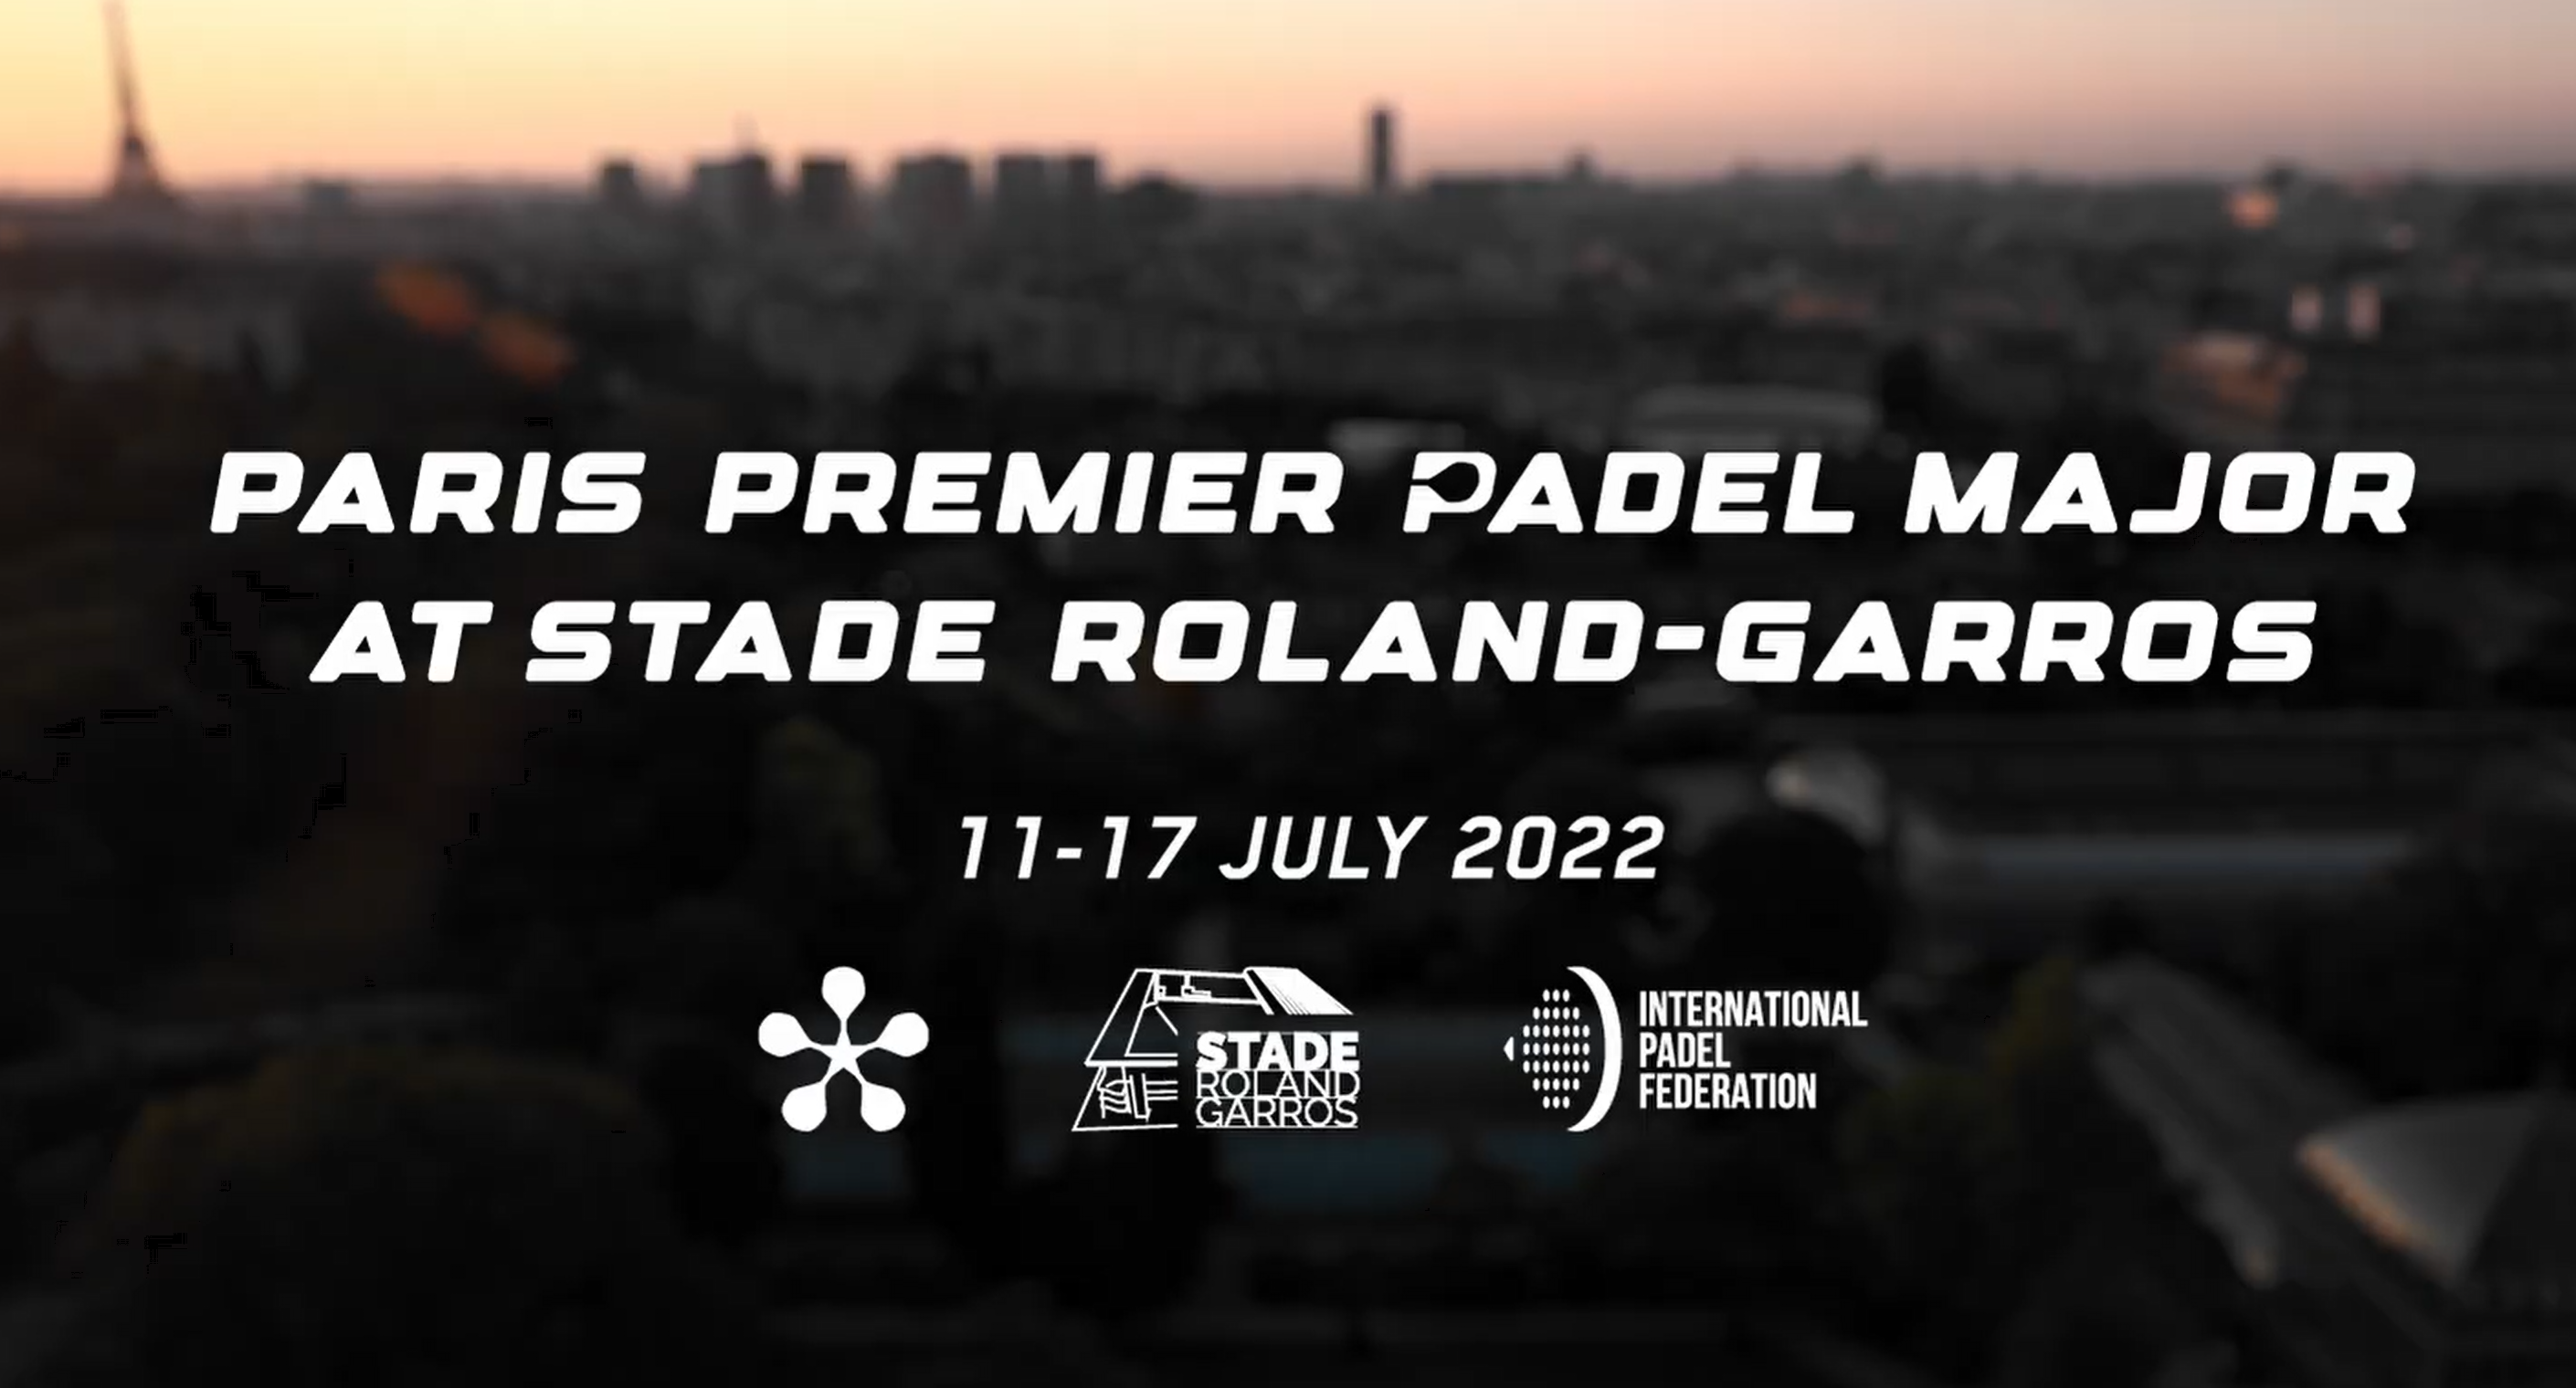 EXCEPTIONAL: Paris Premier Padel Major at the Roland-Garros Stadium from July 11 to 17, 2022